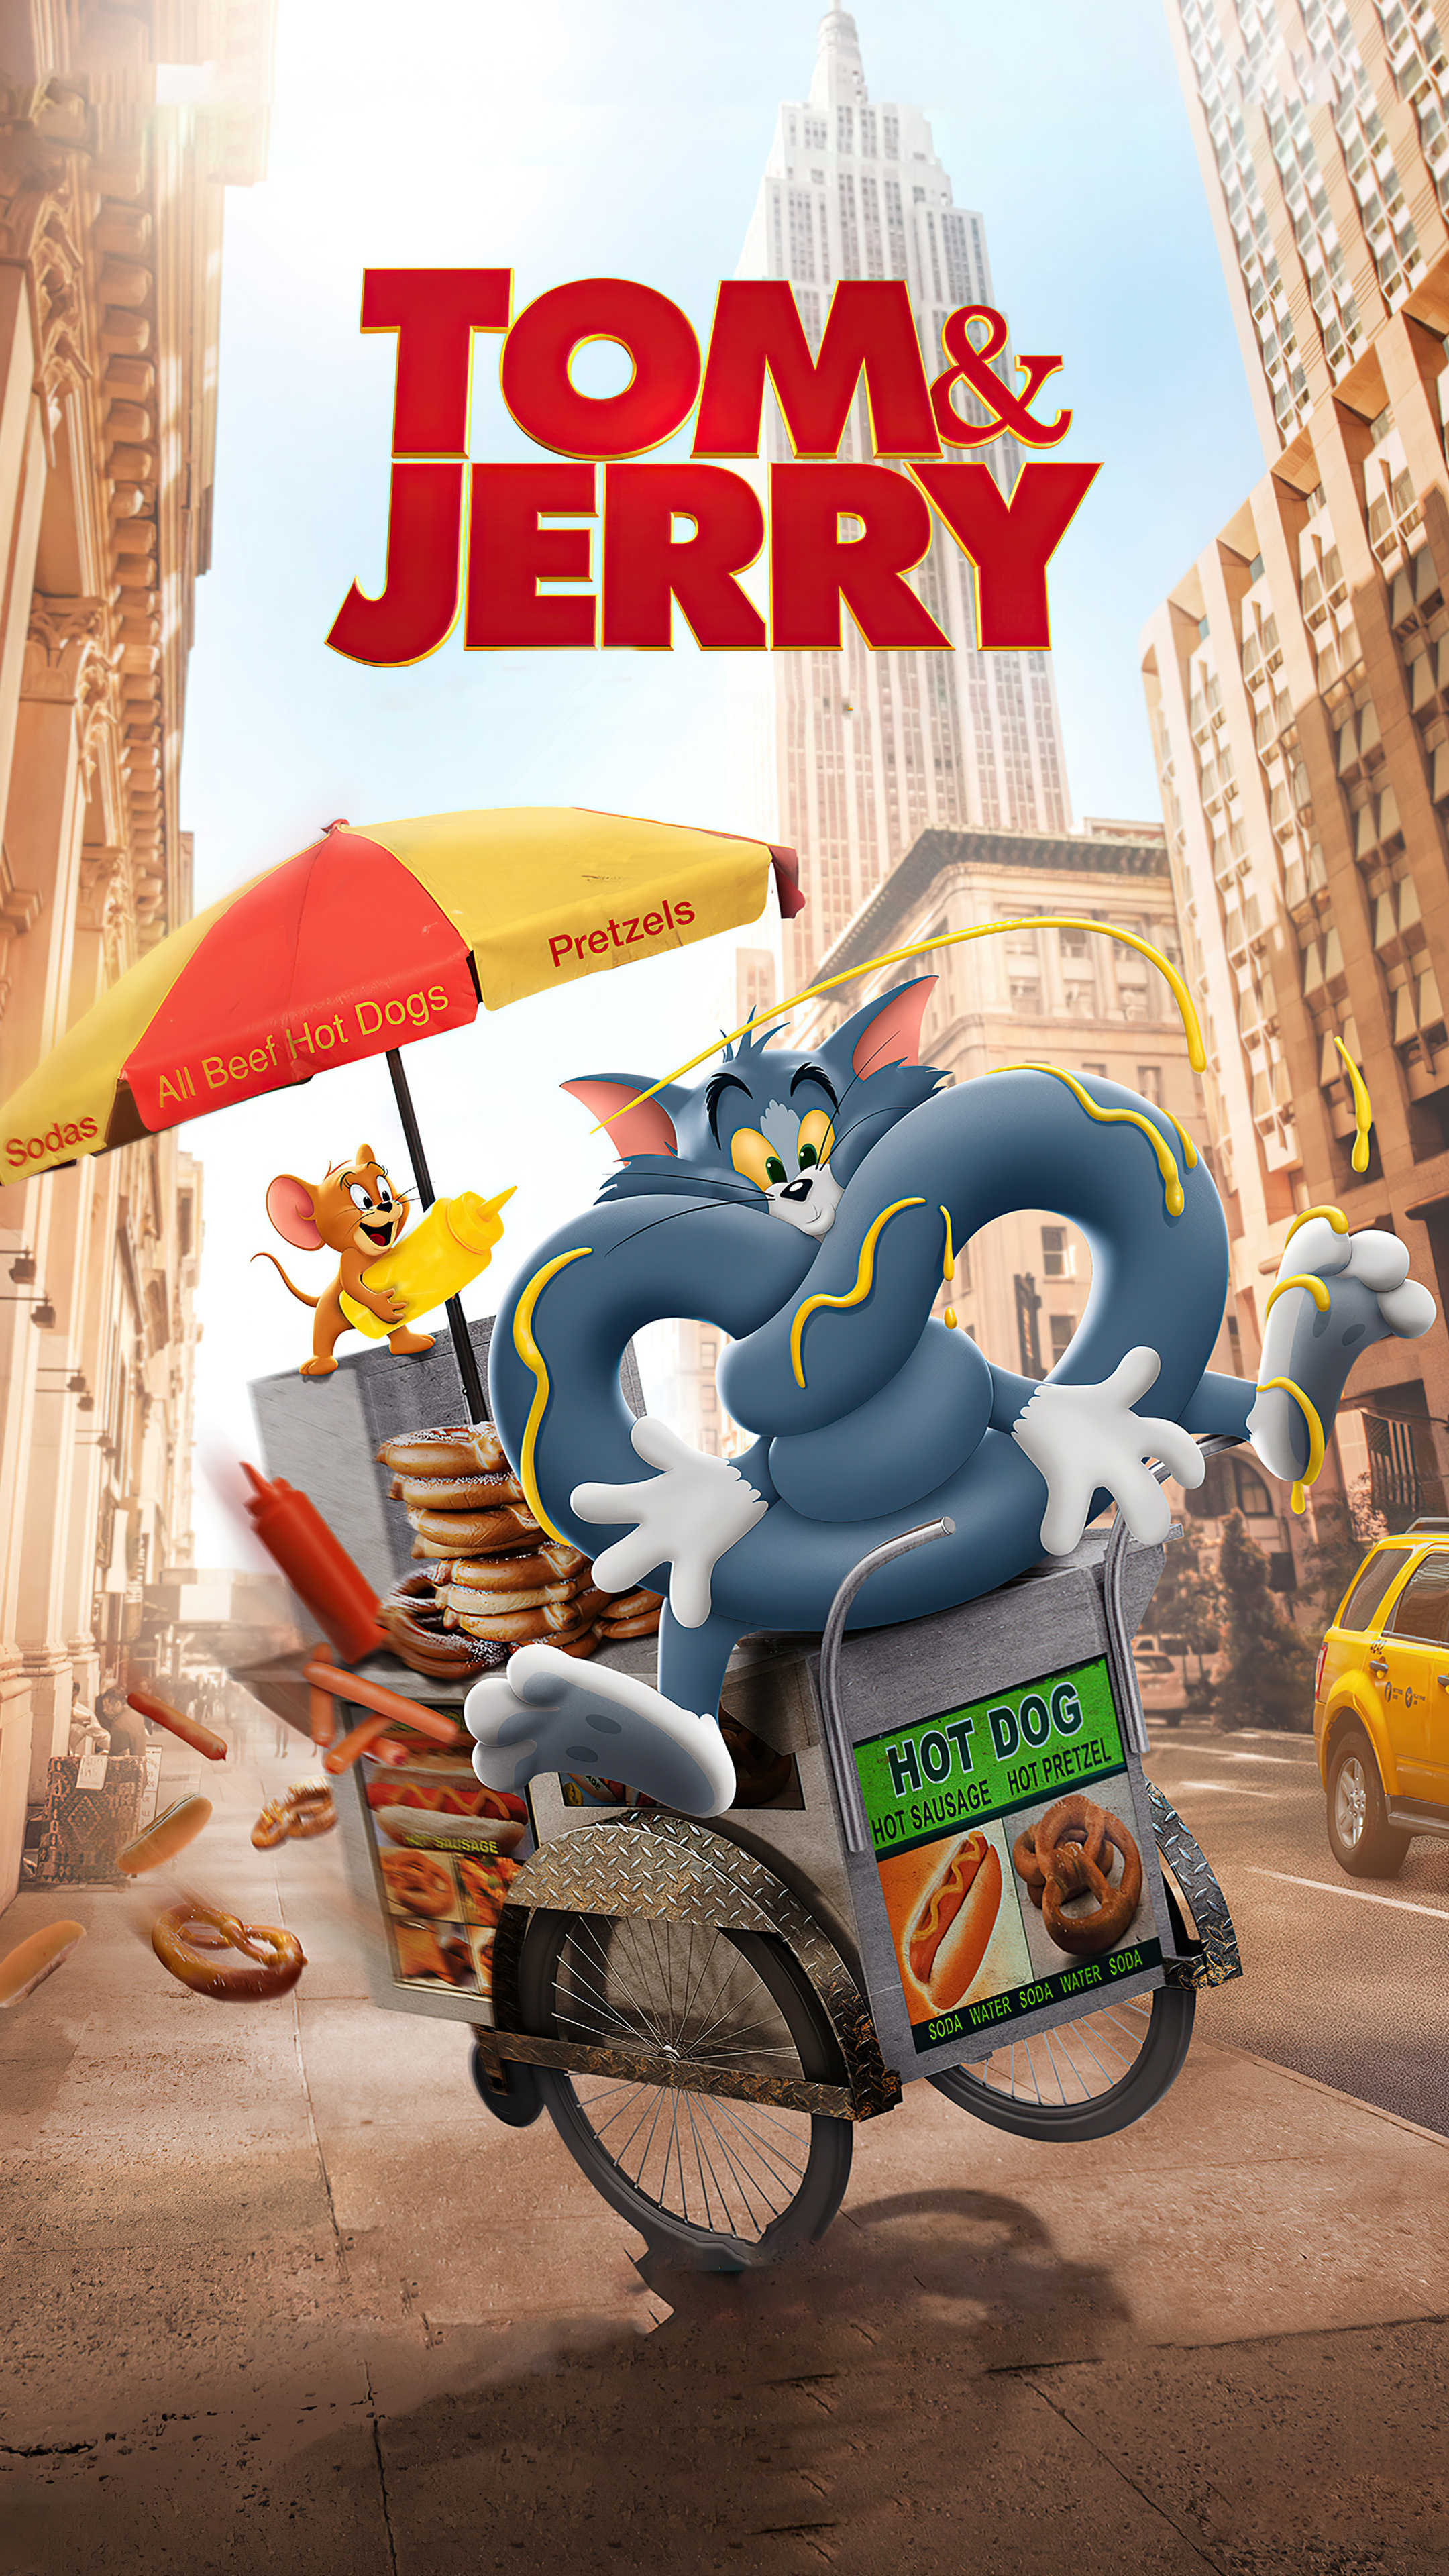 Tom and Jerry 2021, 4k resolution, Stunning visuals, Memorable moments, 2160x3840 4K Handy